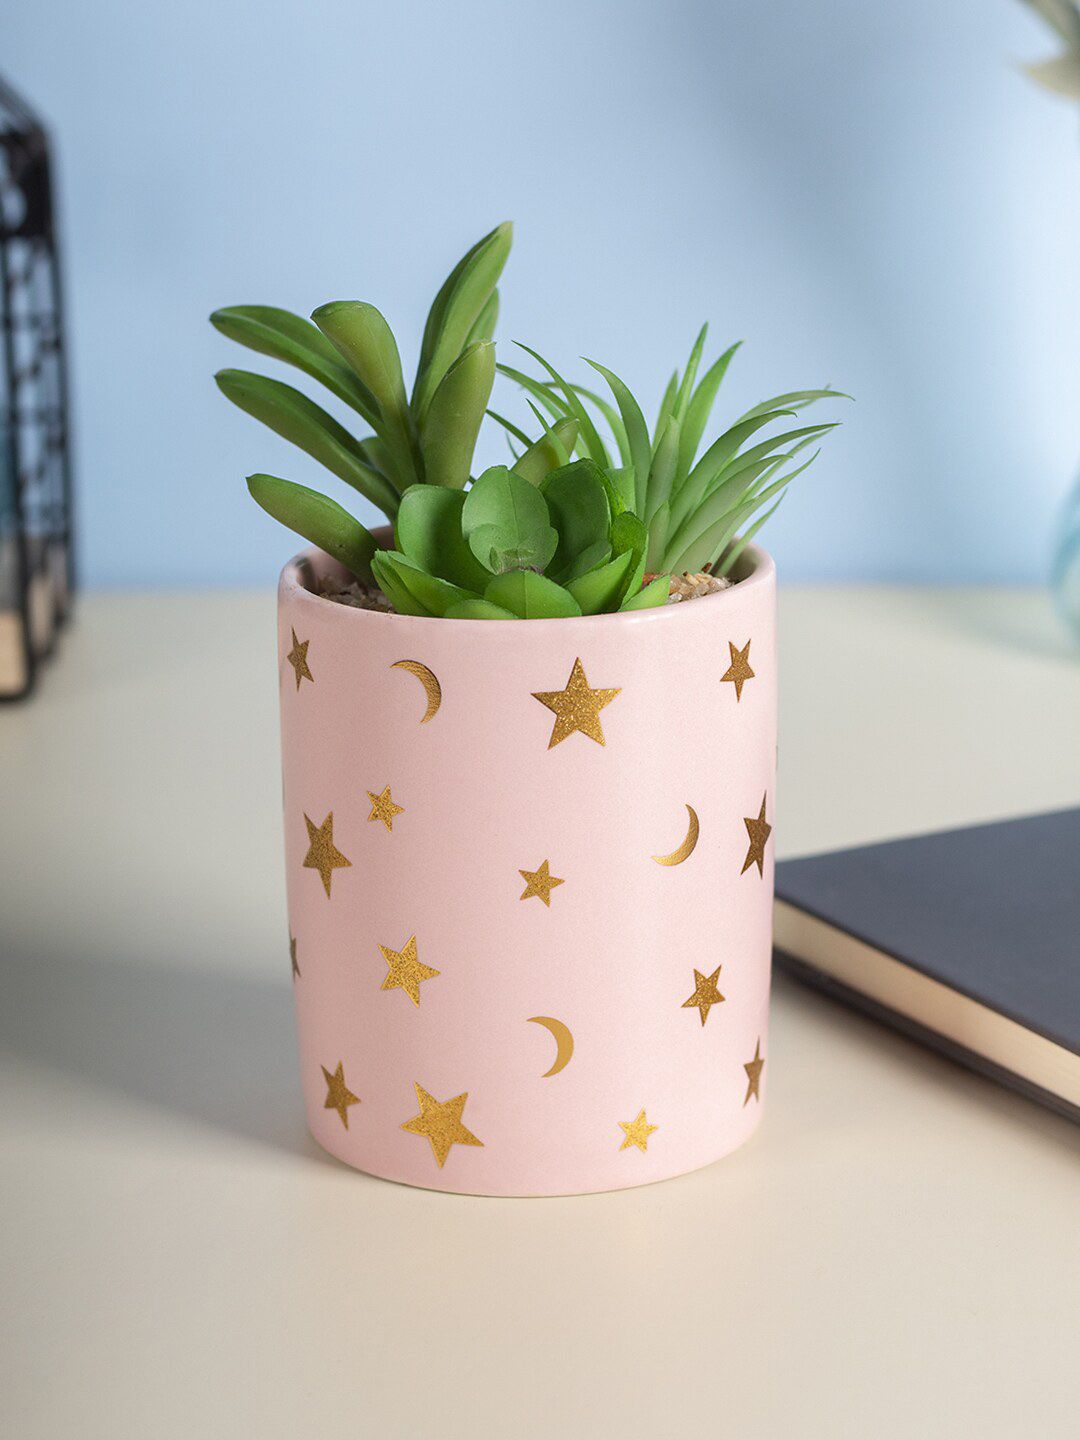 MARKET99 Pink & Green Printed Artificial Plant With Pot Price in India